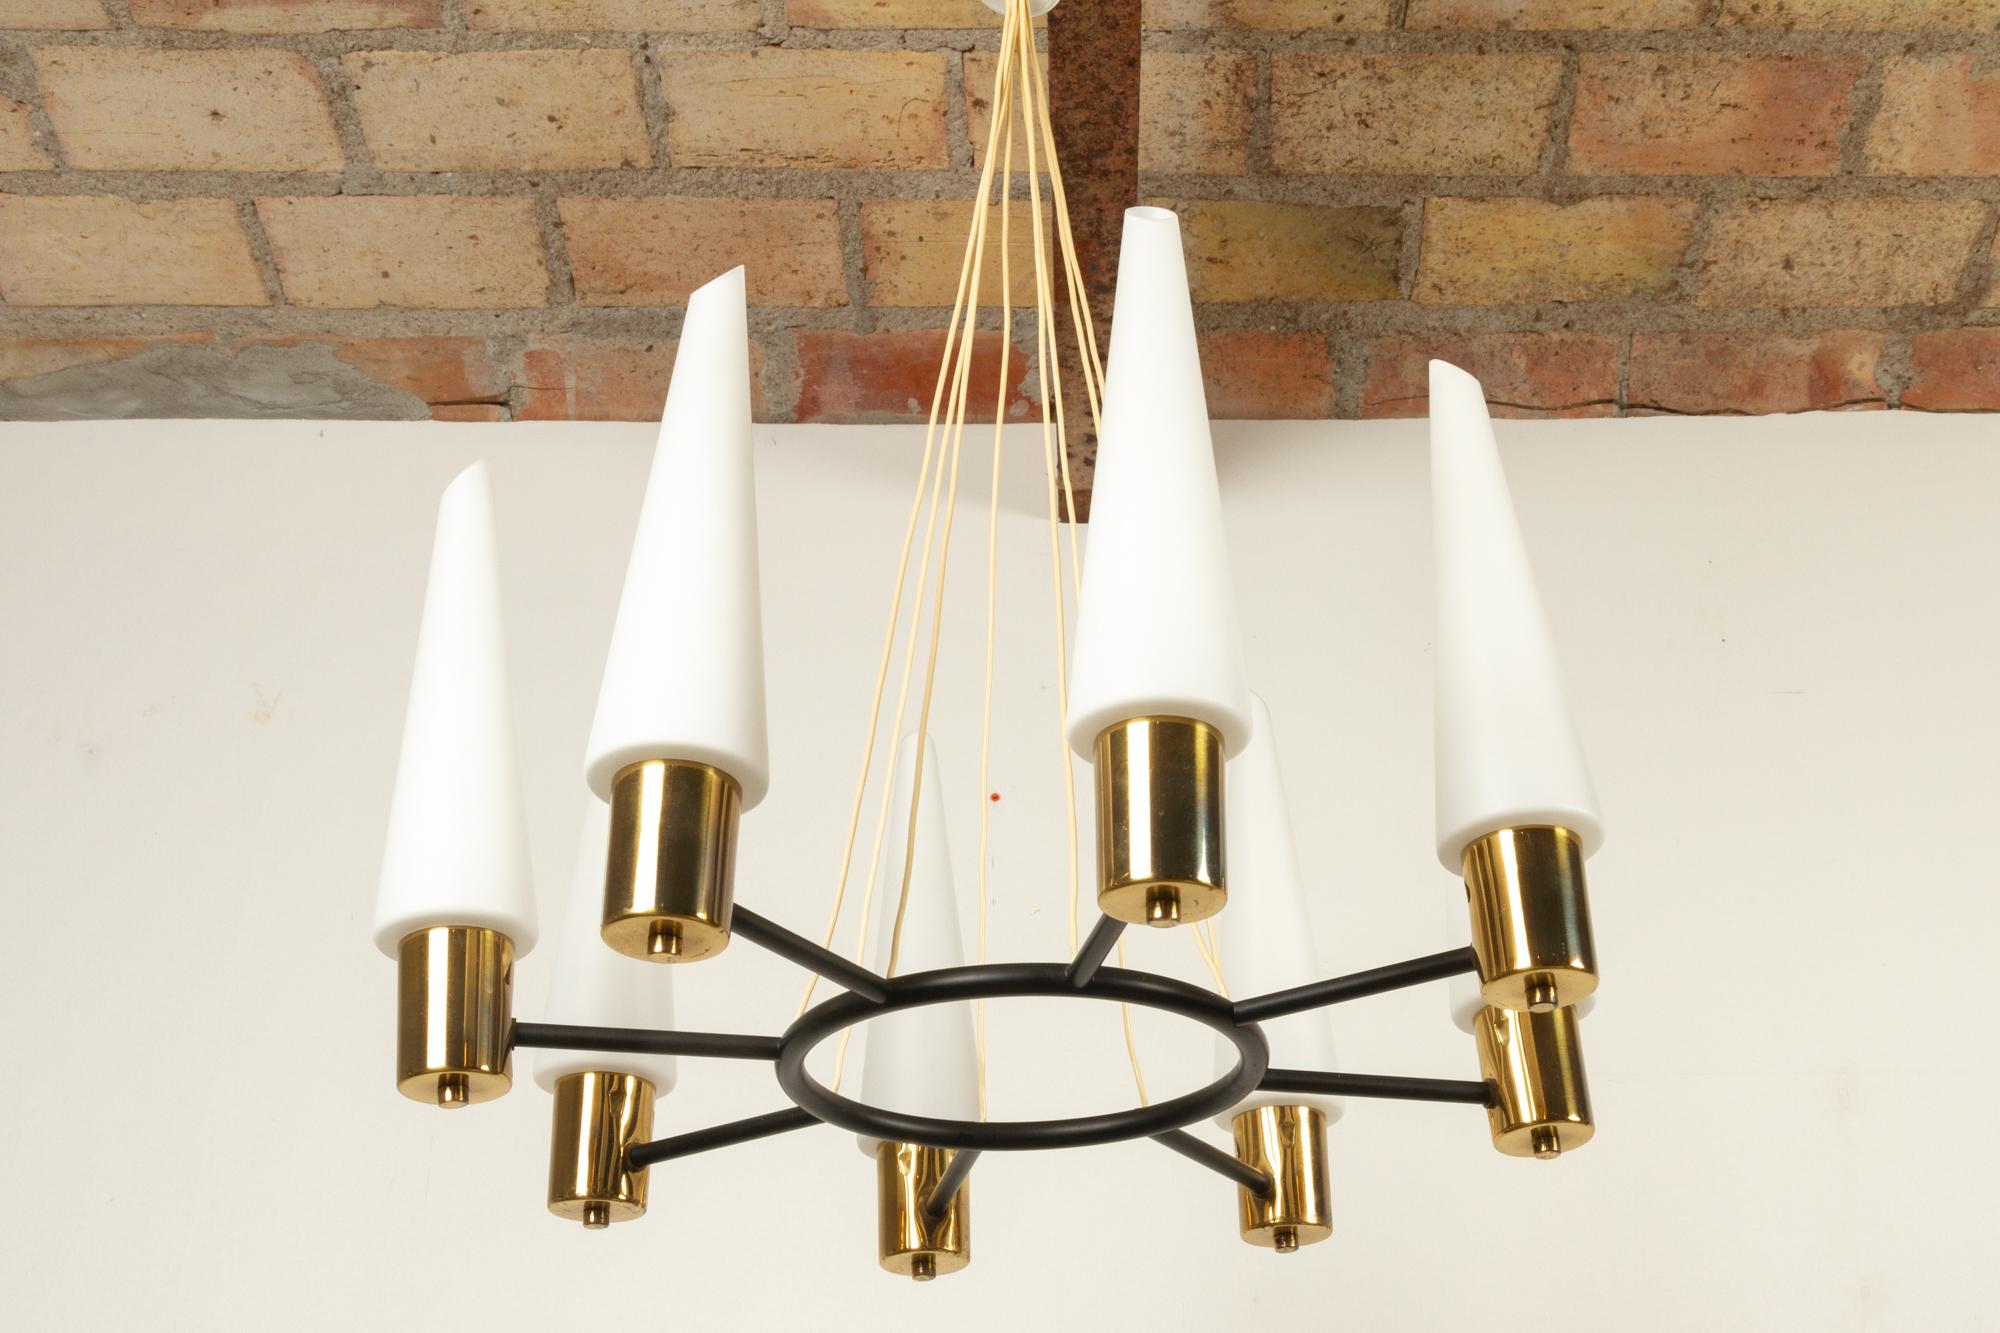 Danish Vintage Midcentury Brass Chandelier with Opal Glass Shades, 1960s For Sale